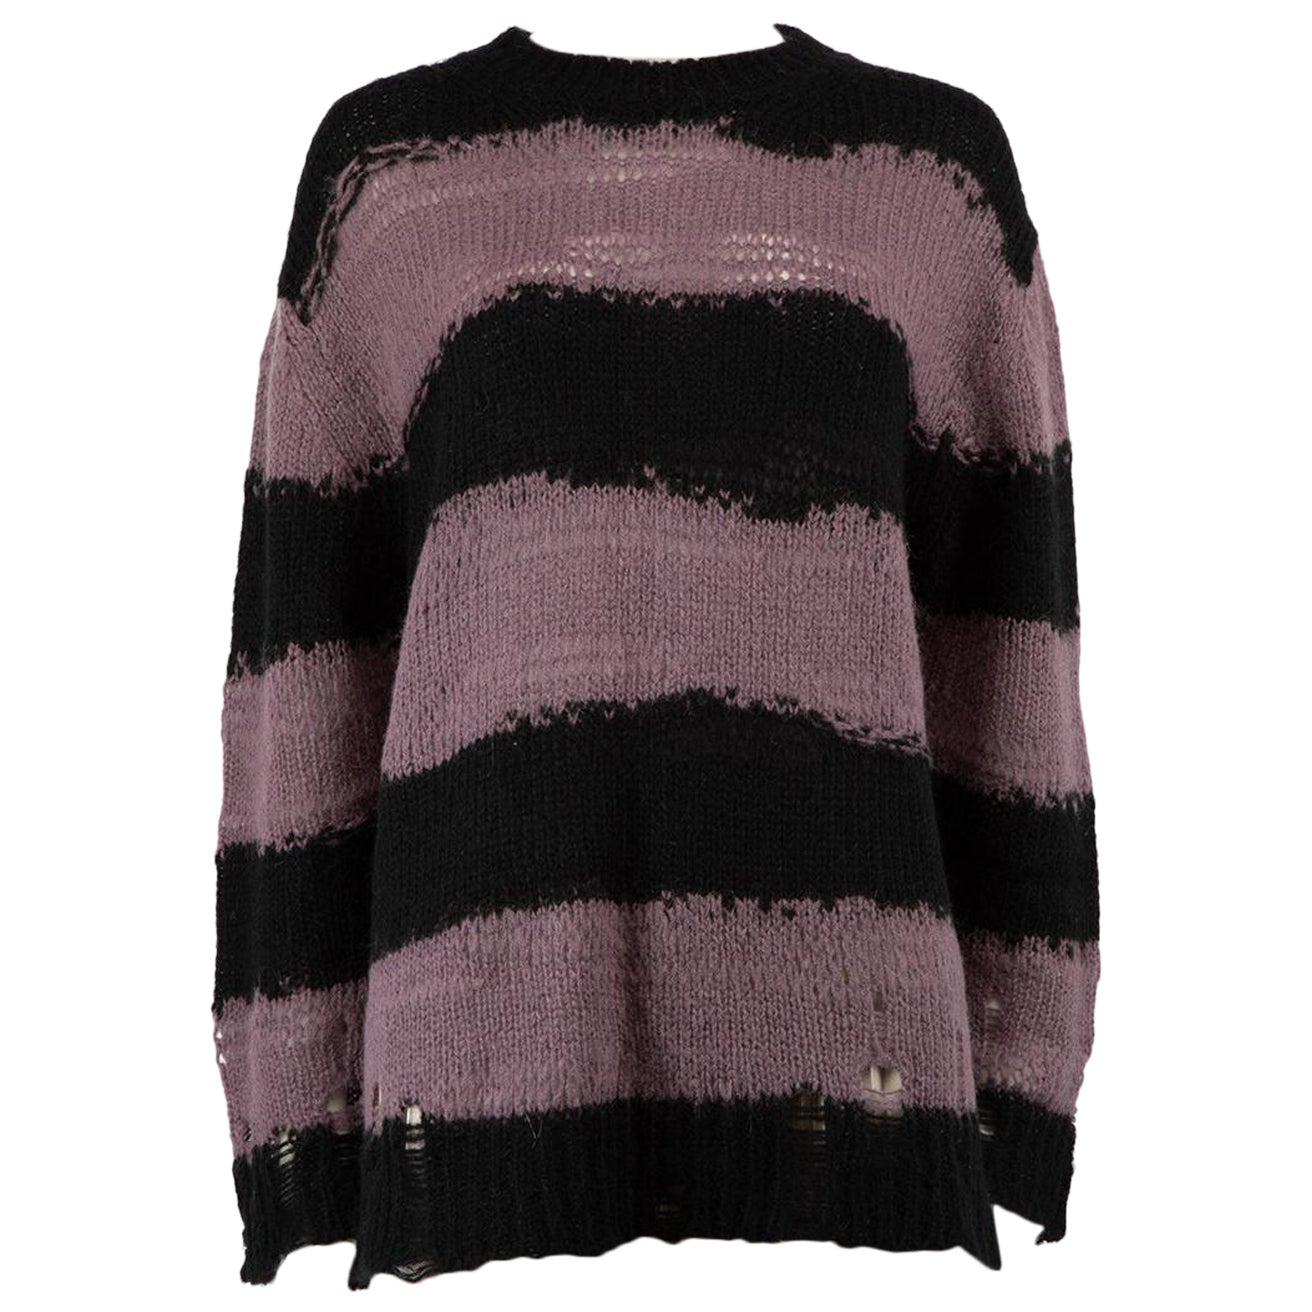 Acne Studios Striped Distressed Knit Jumper Size S For Sale